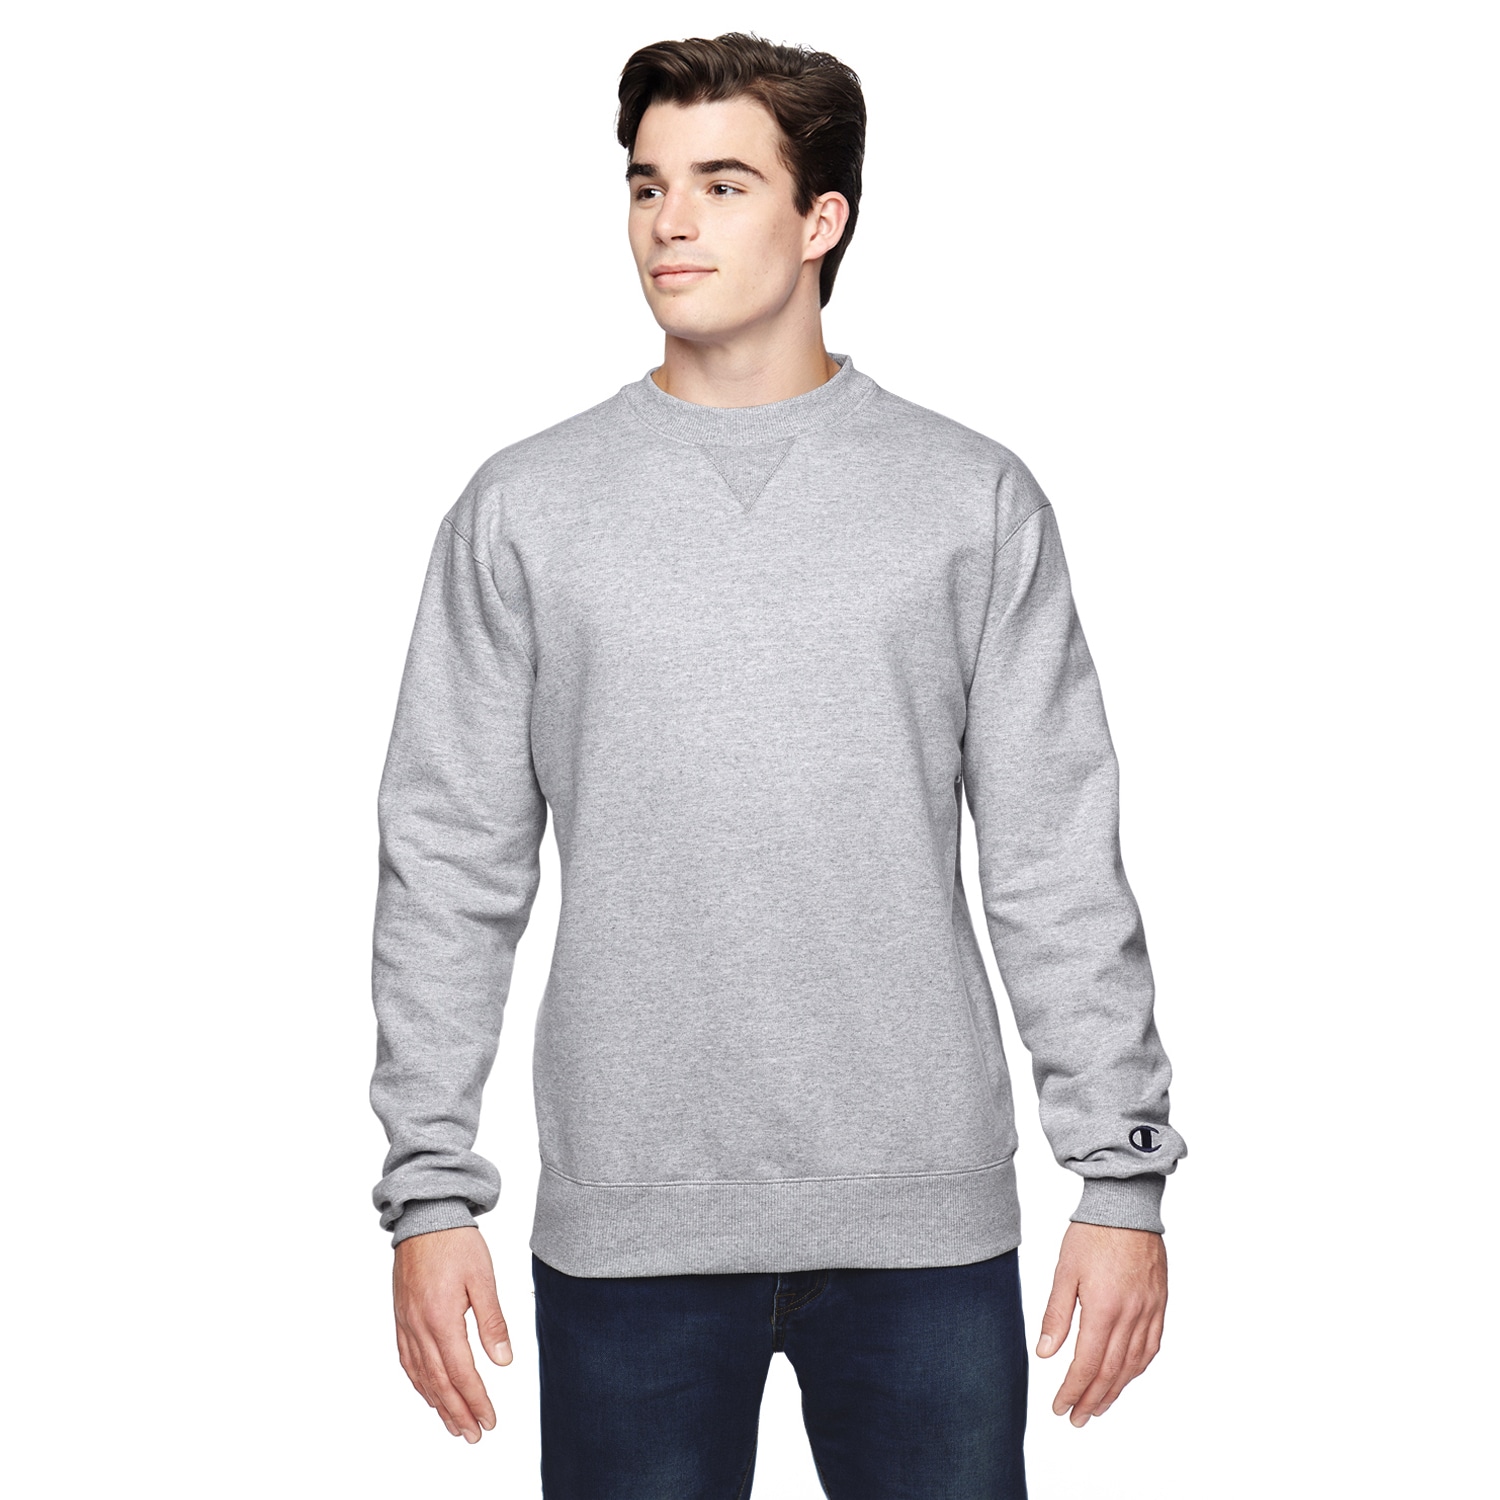 Download Champions Men's Big and Tall Heather Grey Polyester Crew ...